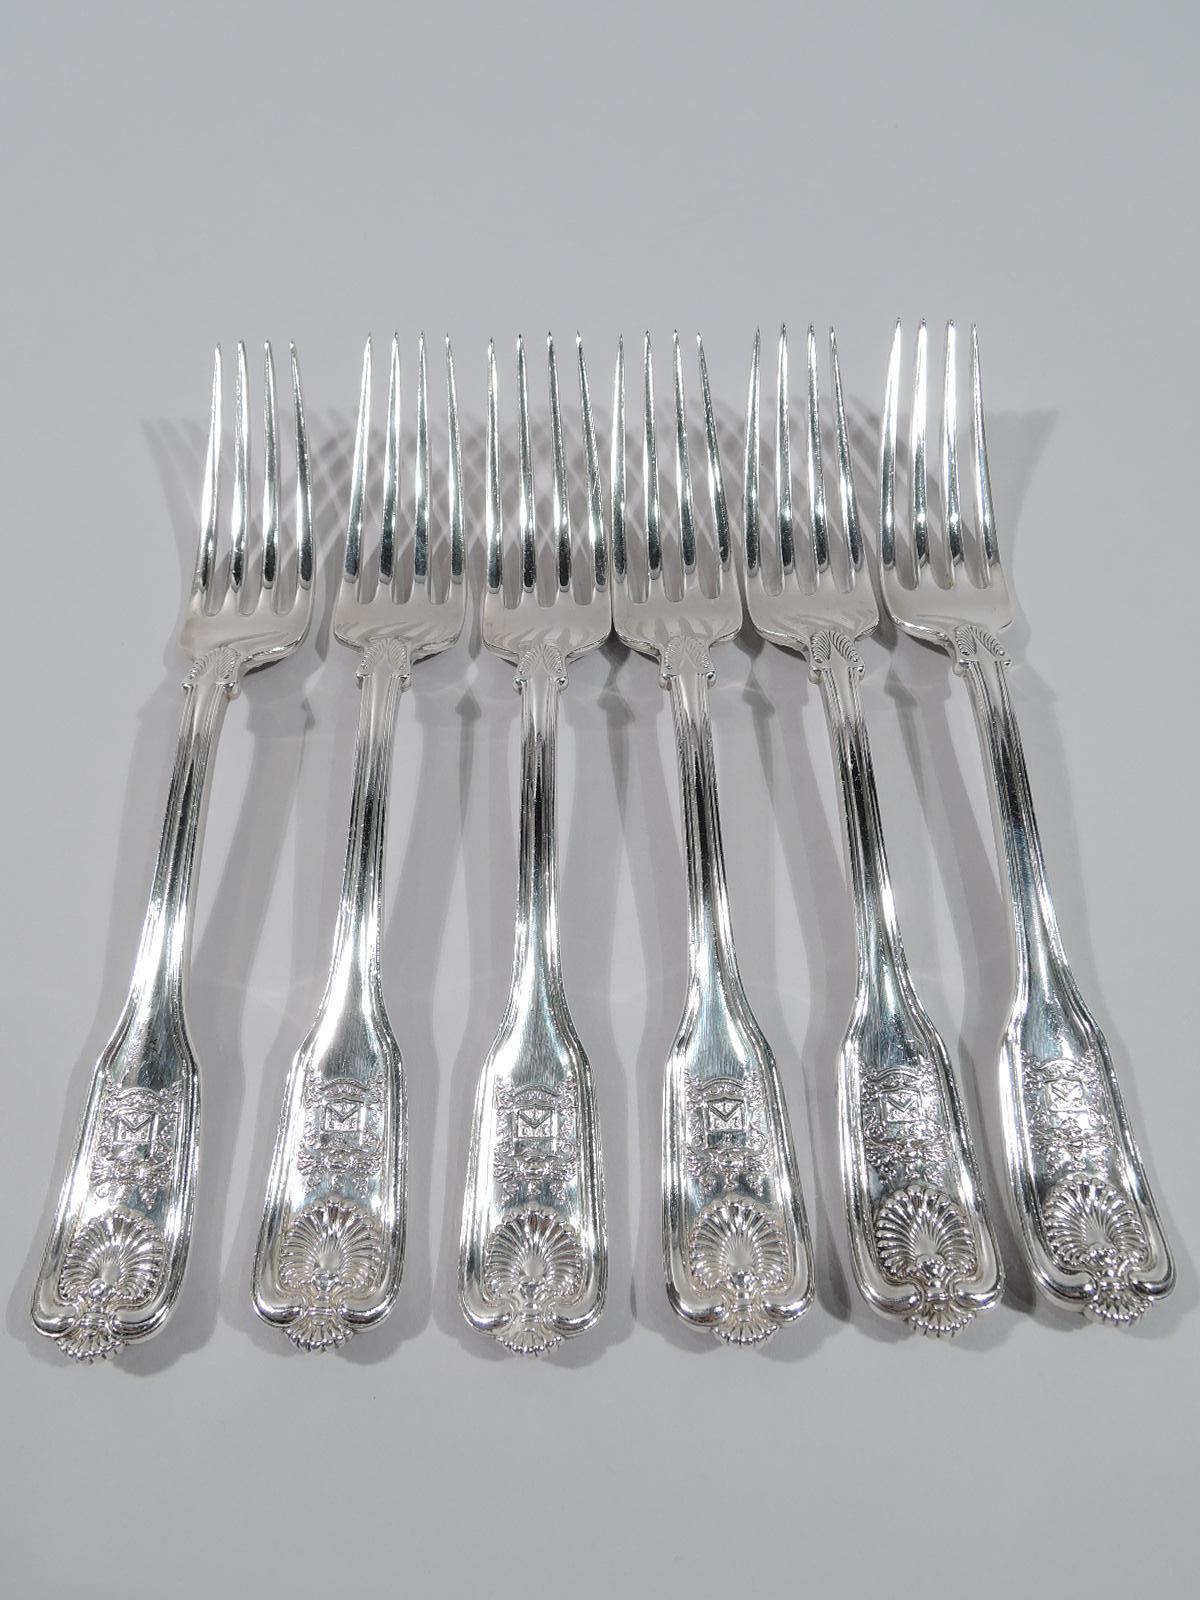 Twelve sterling silver dinner forks. Made by Tiffany & Co. in New York, circa 1886.

John Carter Brown (1797-1874) of Rhode Island was a noted book collector. In the decade after his death his widow commissioned from Tiffany a custom flatware